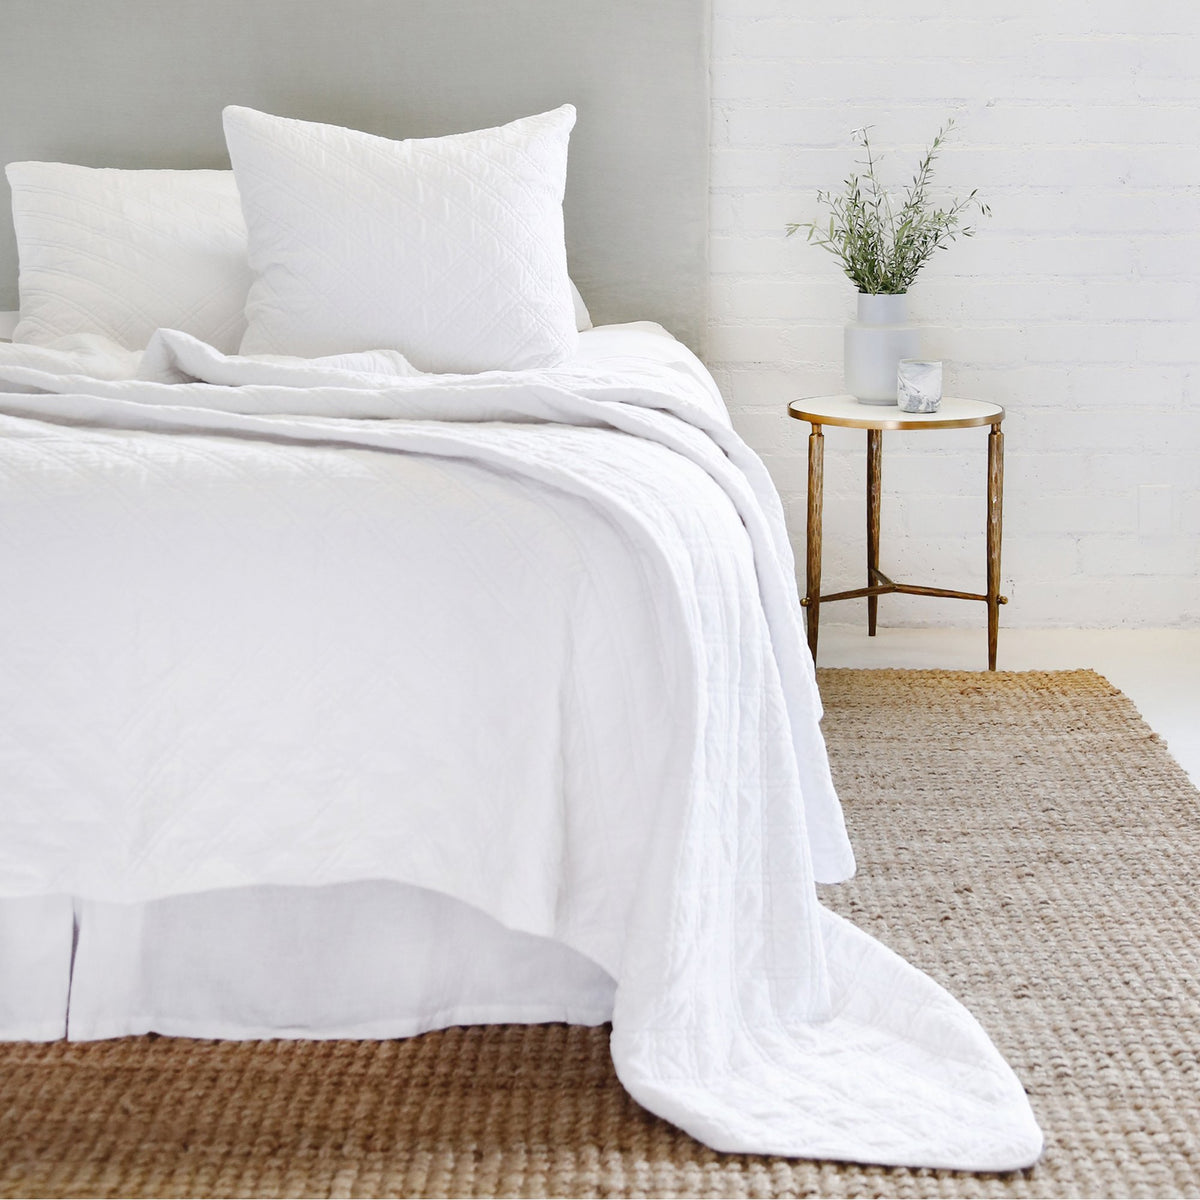 POM POM BRUSSELS COVERLET COLLECTION - WHITE